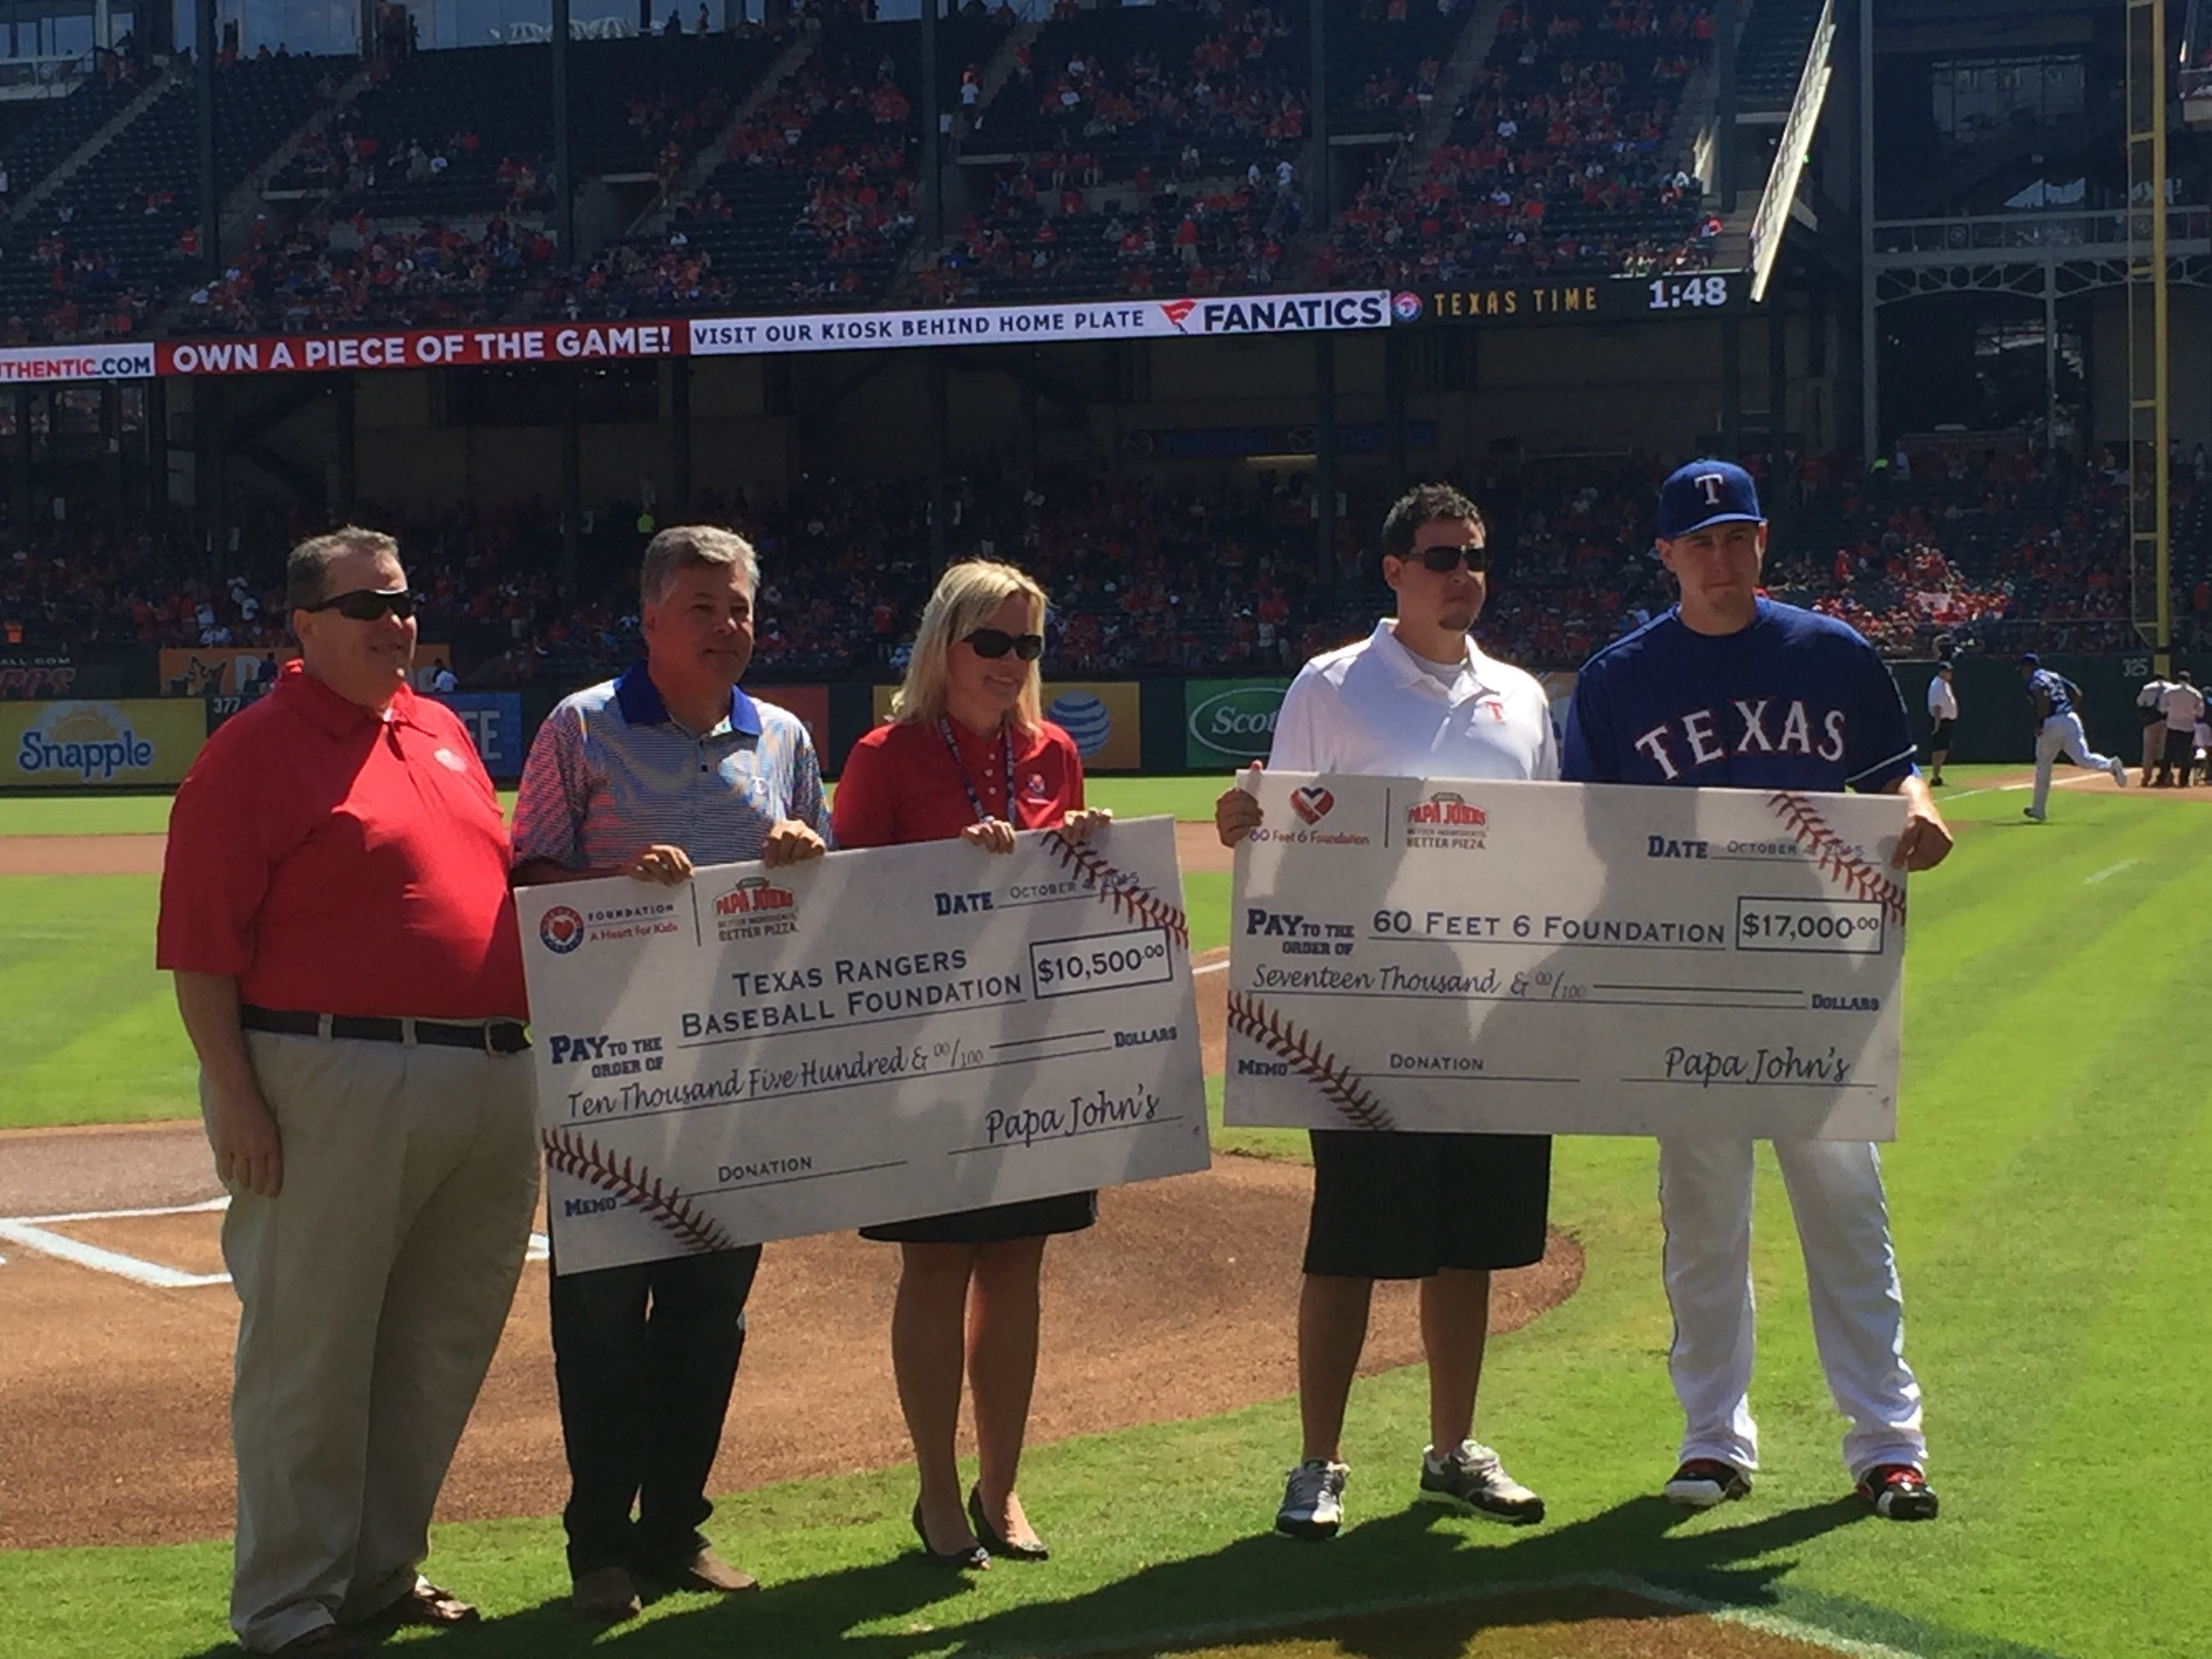 Steve McNeil, operations vice president at Papa John's presents checks to the Texas Rangers Baseball Foundation and 60 Feet 6 at the game on October 4.